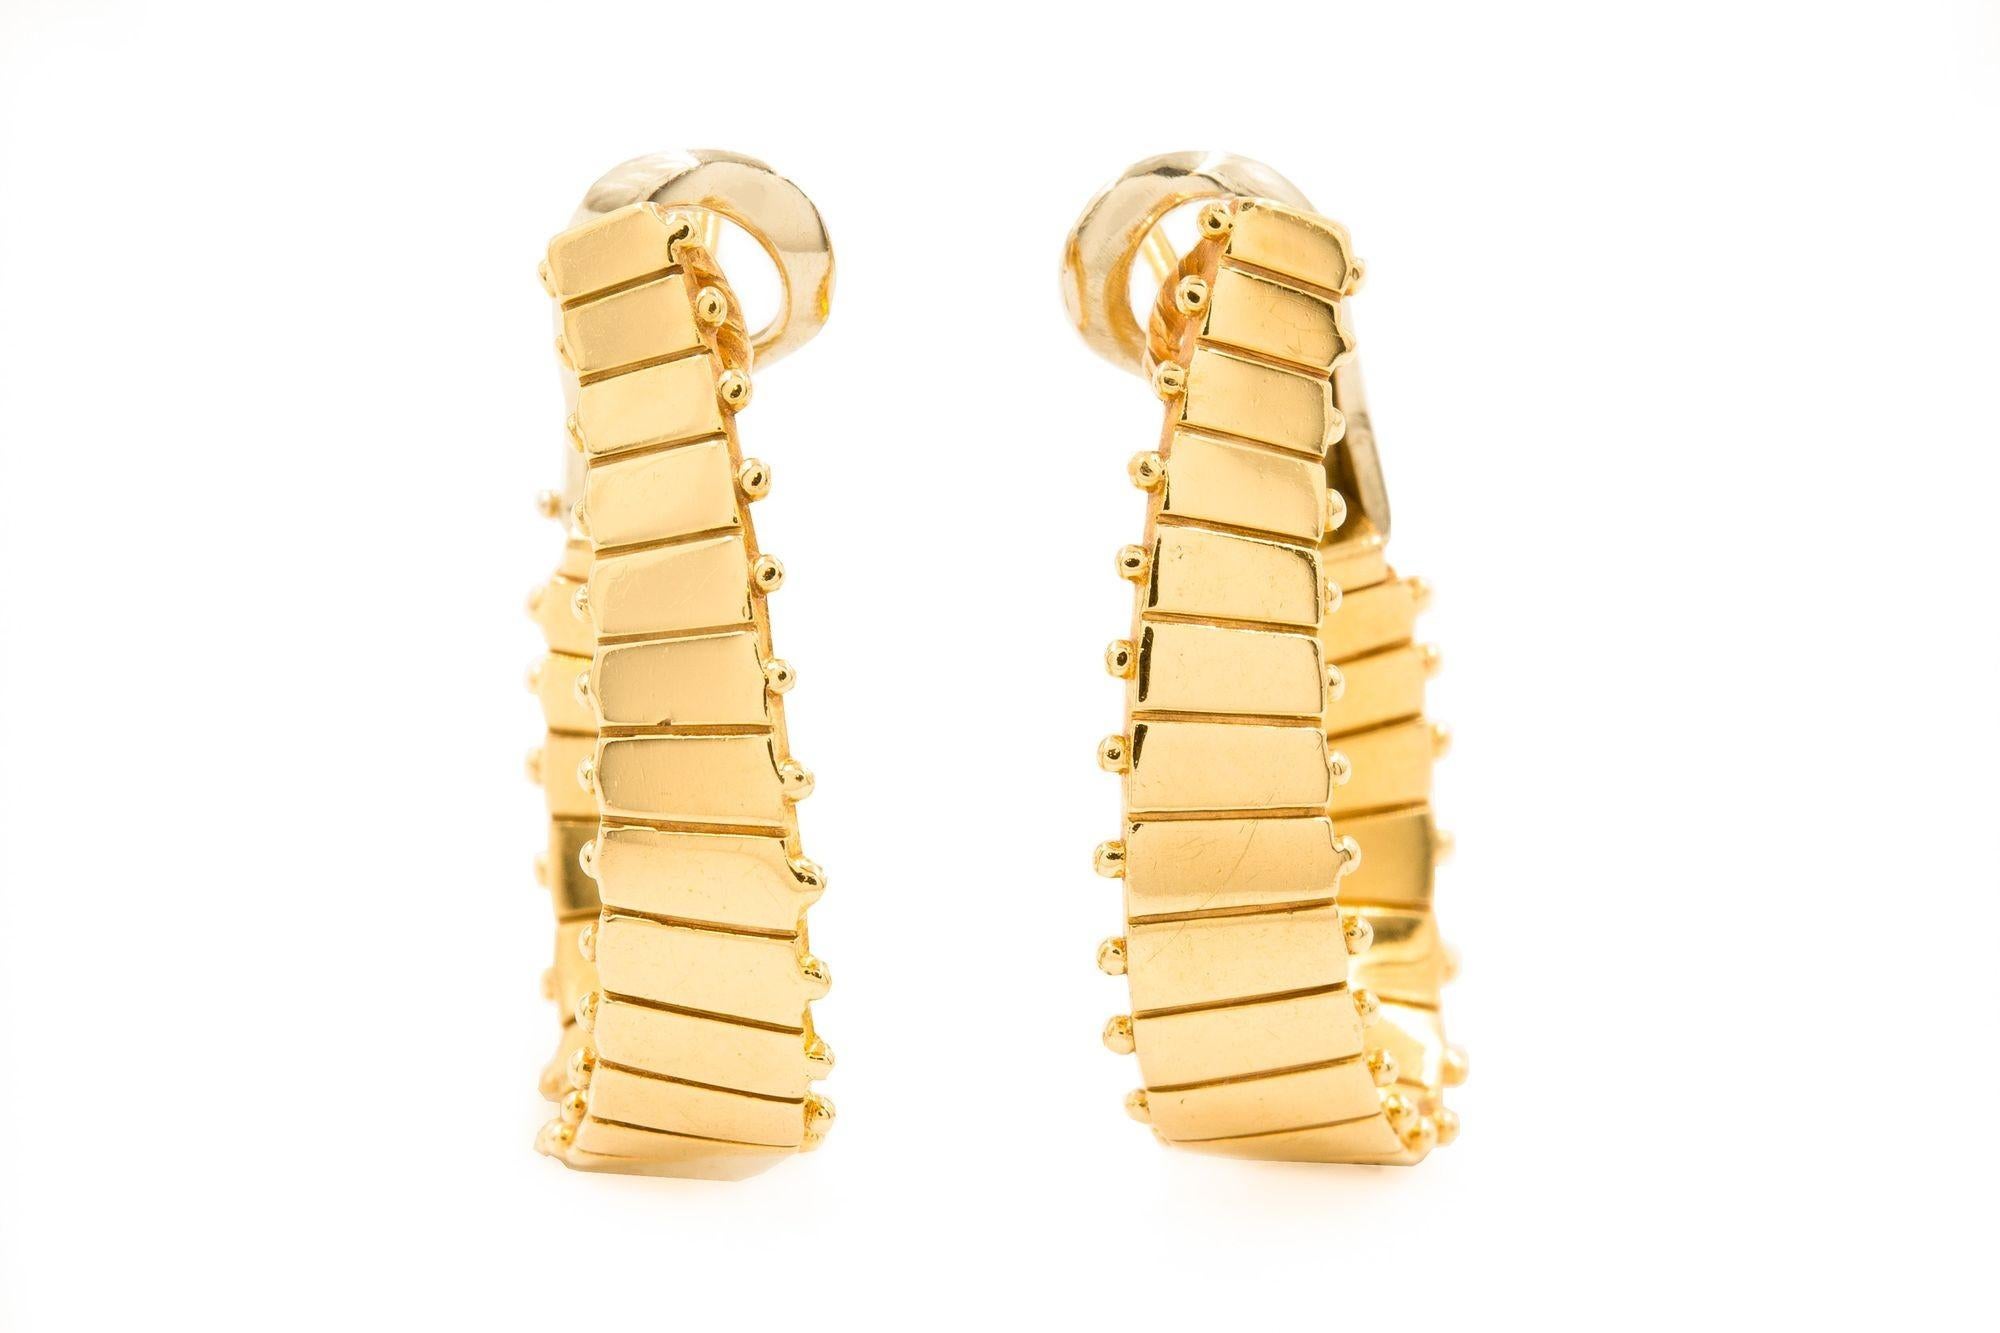 VINTAGE PAIR OF 14K YELLOW GOLD RIDGED-HOOP EARRINGS
Item # C104601

A very nice vintage pair of hoop earrings entirely crafted of 14 karat yellow gold, they hang on stud posts with omega clip-backs. A gorgeous pair for everyday